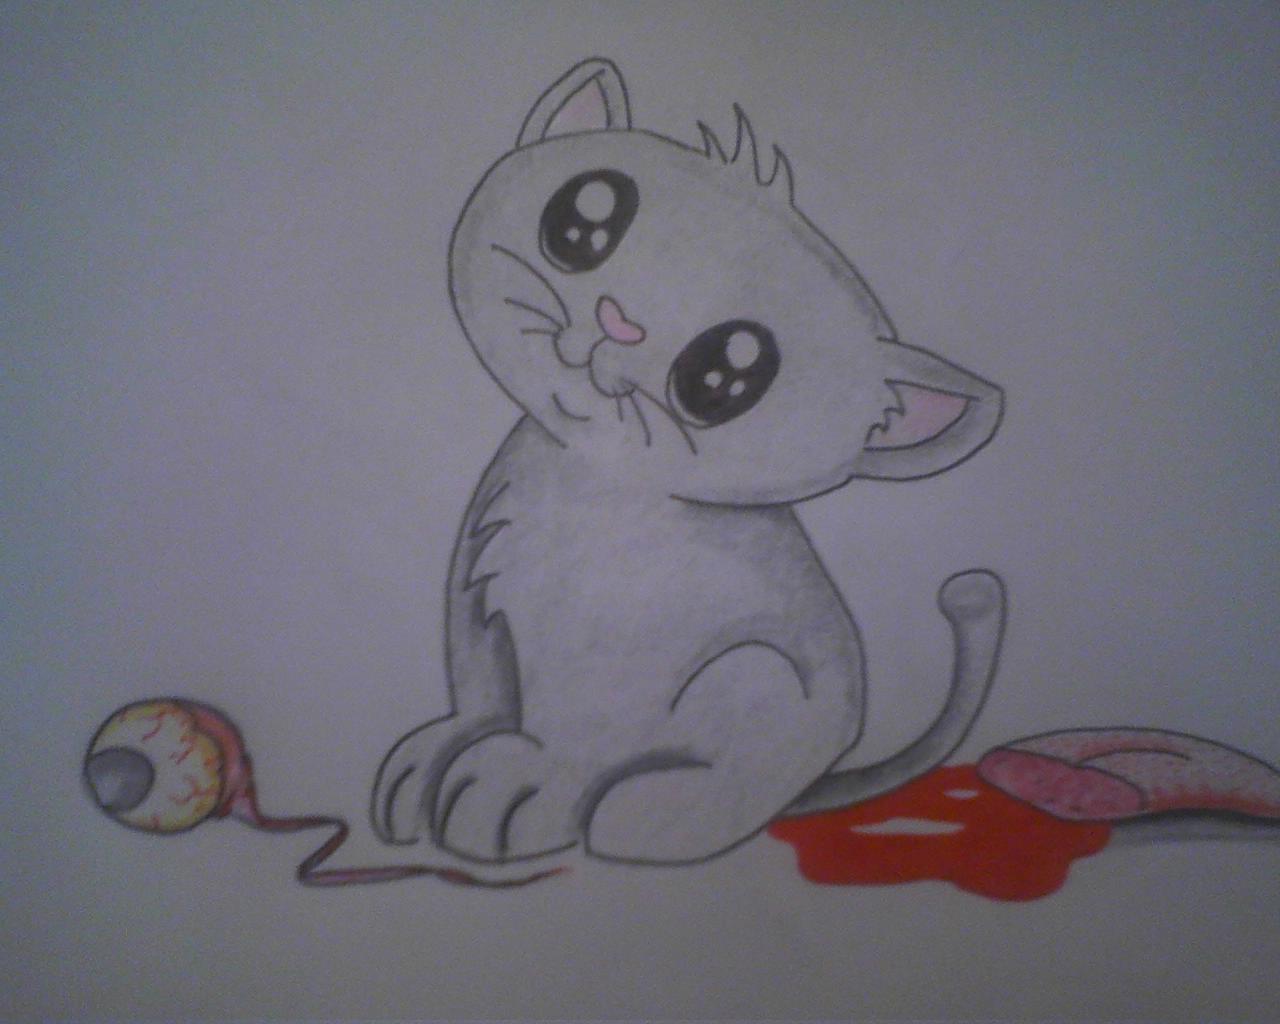 someone asked me to draw cute kittens instead of morbid things. So I drew them a cute kitten.